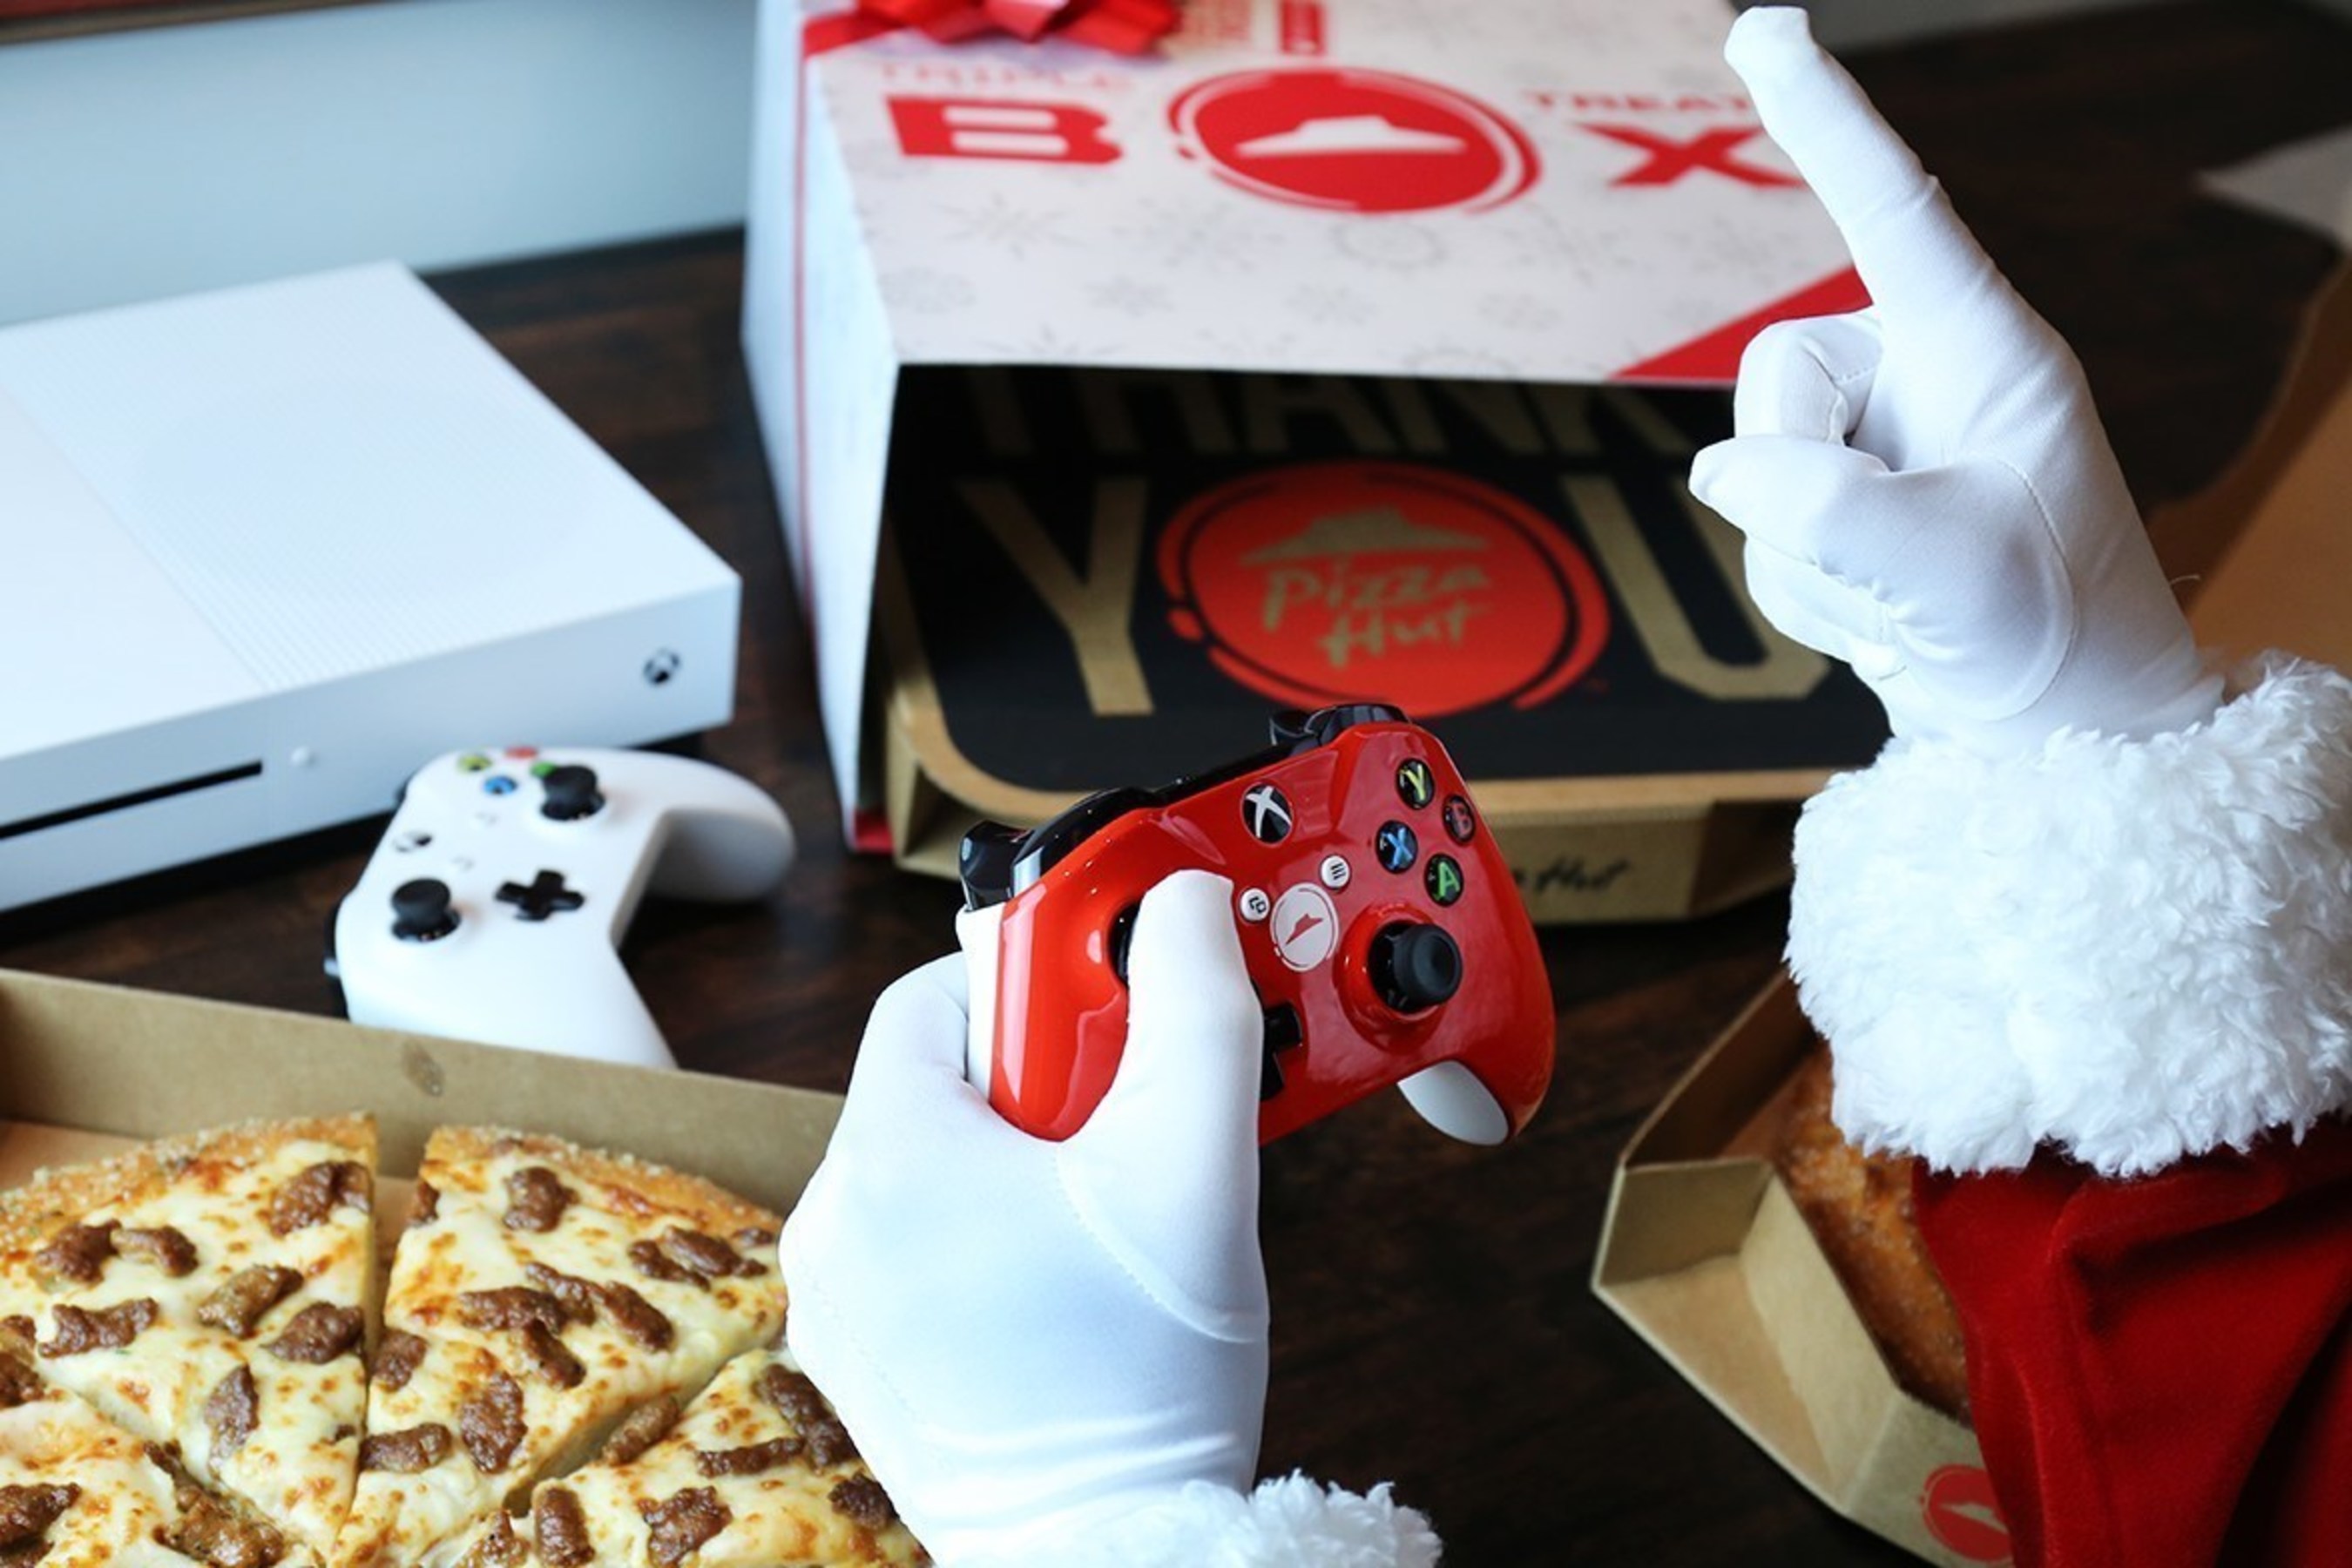 Pizza Hut and Xbox have teamed up to spread holiday cheer by adding a new treat to the Pizza Hut Triple Treat Box - the chance to win an Xbox One S, the ultimate games and 4k entertainment system every hour from Nov. 7 through Dec. 24. That's 1,140 free Xbox One S consoles. Customers will receive an entry code for a chance to win an Xbox One S and custom Pizza Hut designed red controller, as well as an offer for $10 off an Xbox One game with each purchase of a Triple Treat Box while supplies last.